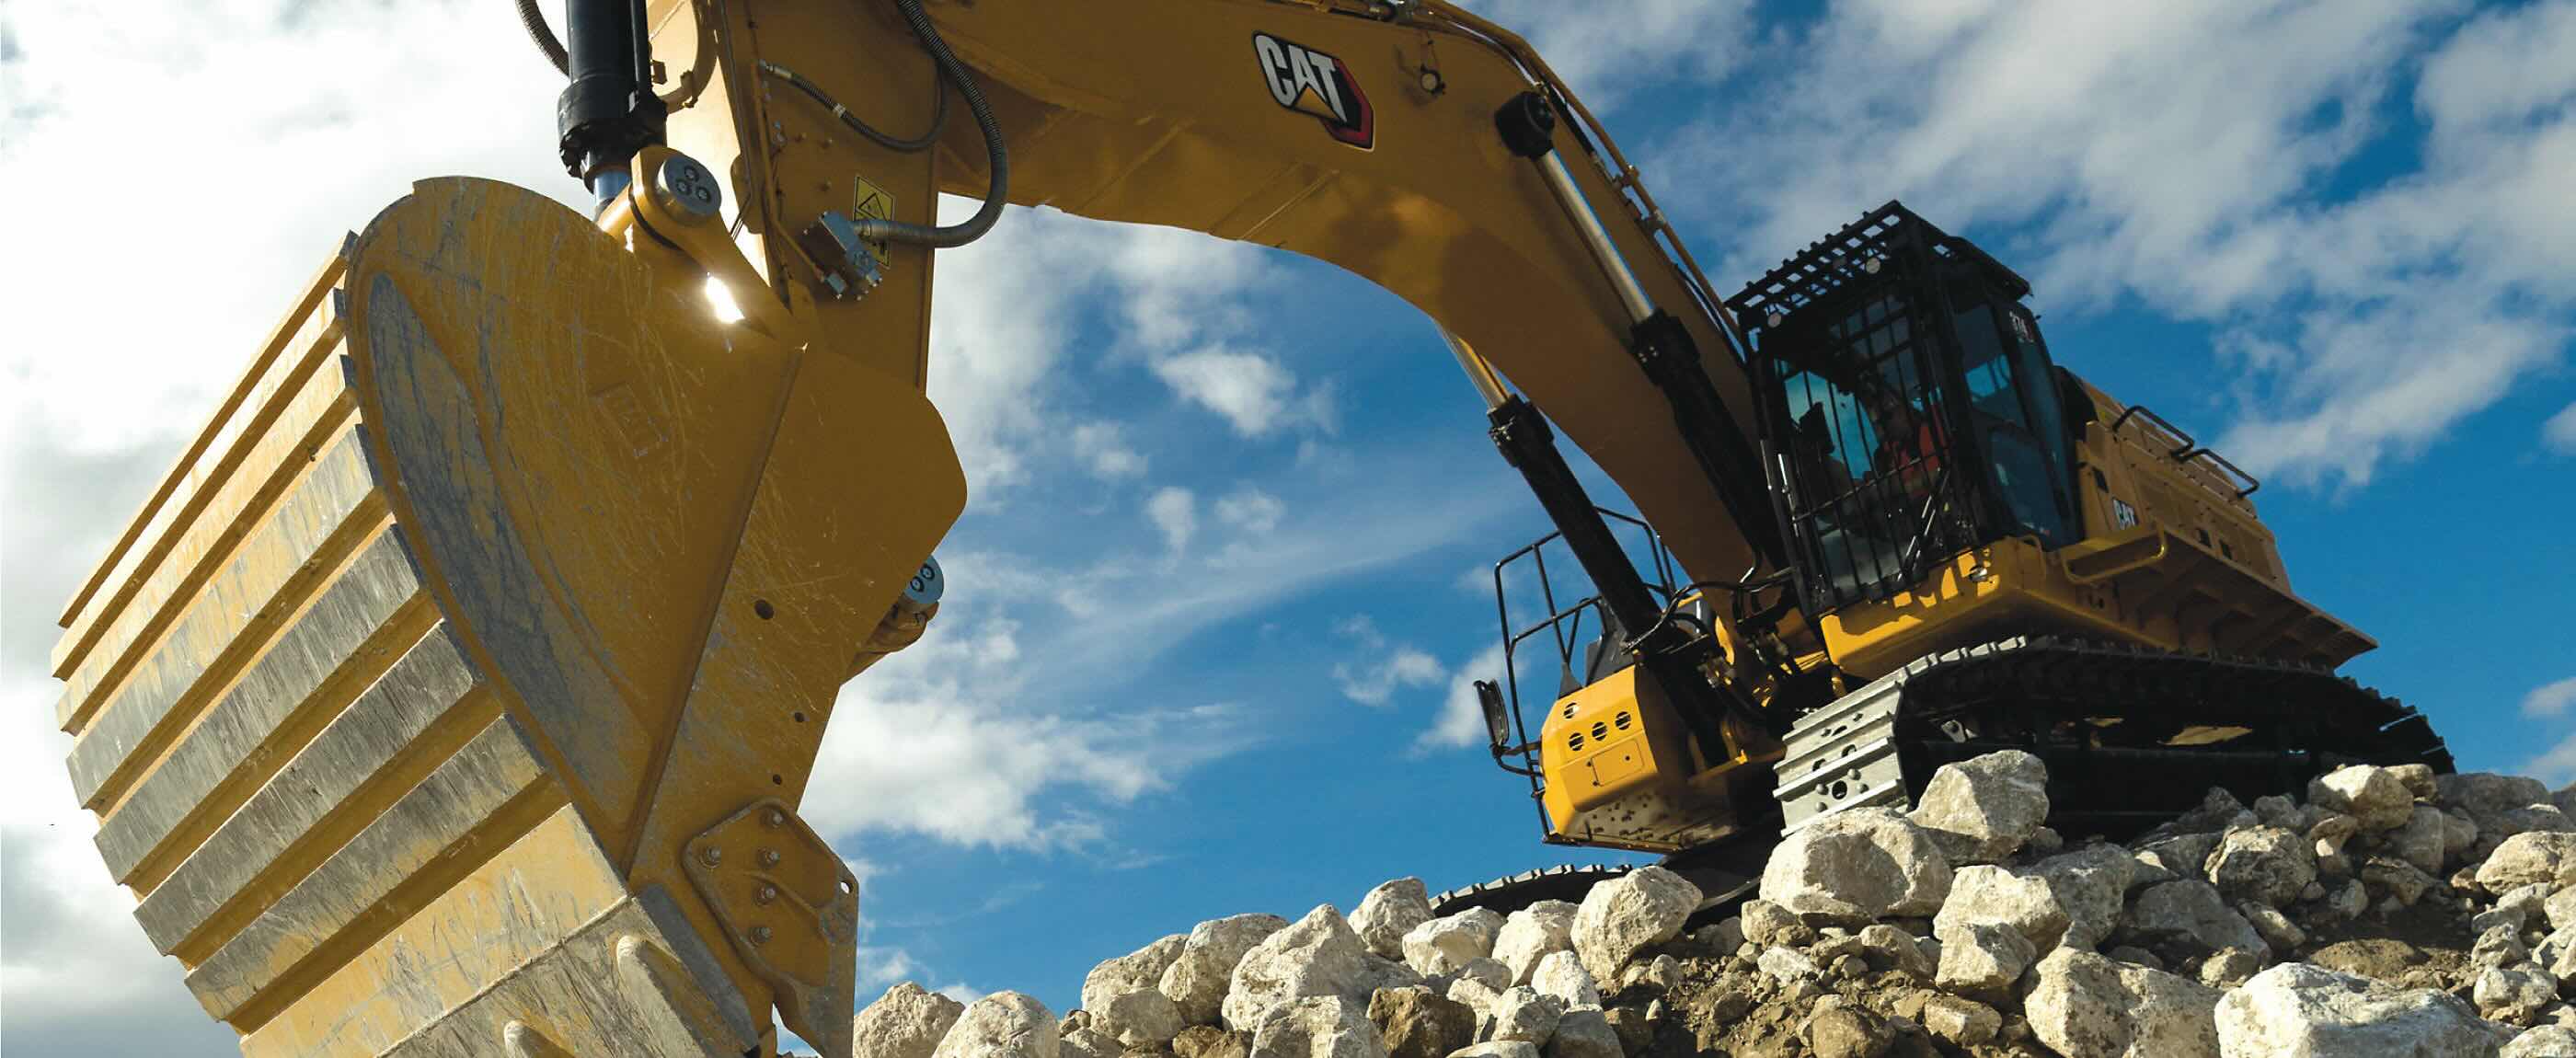 What Does CAT Stand For In Construction